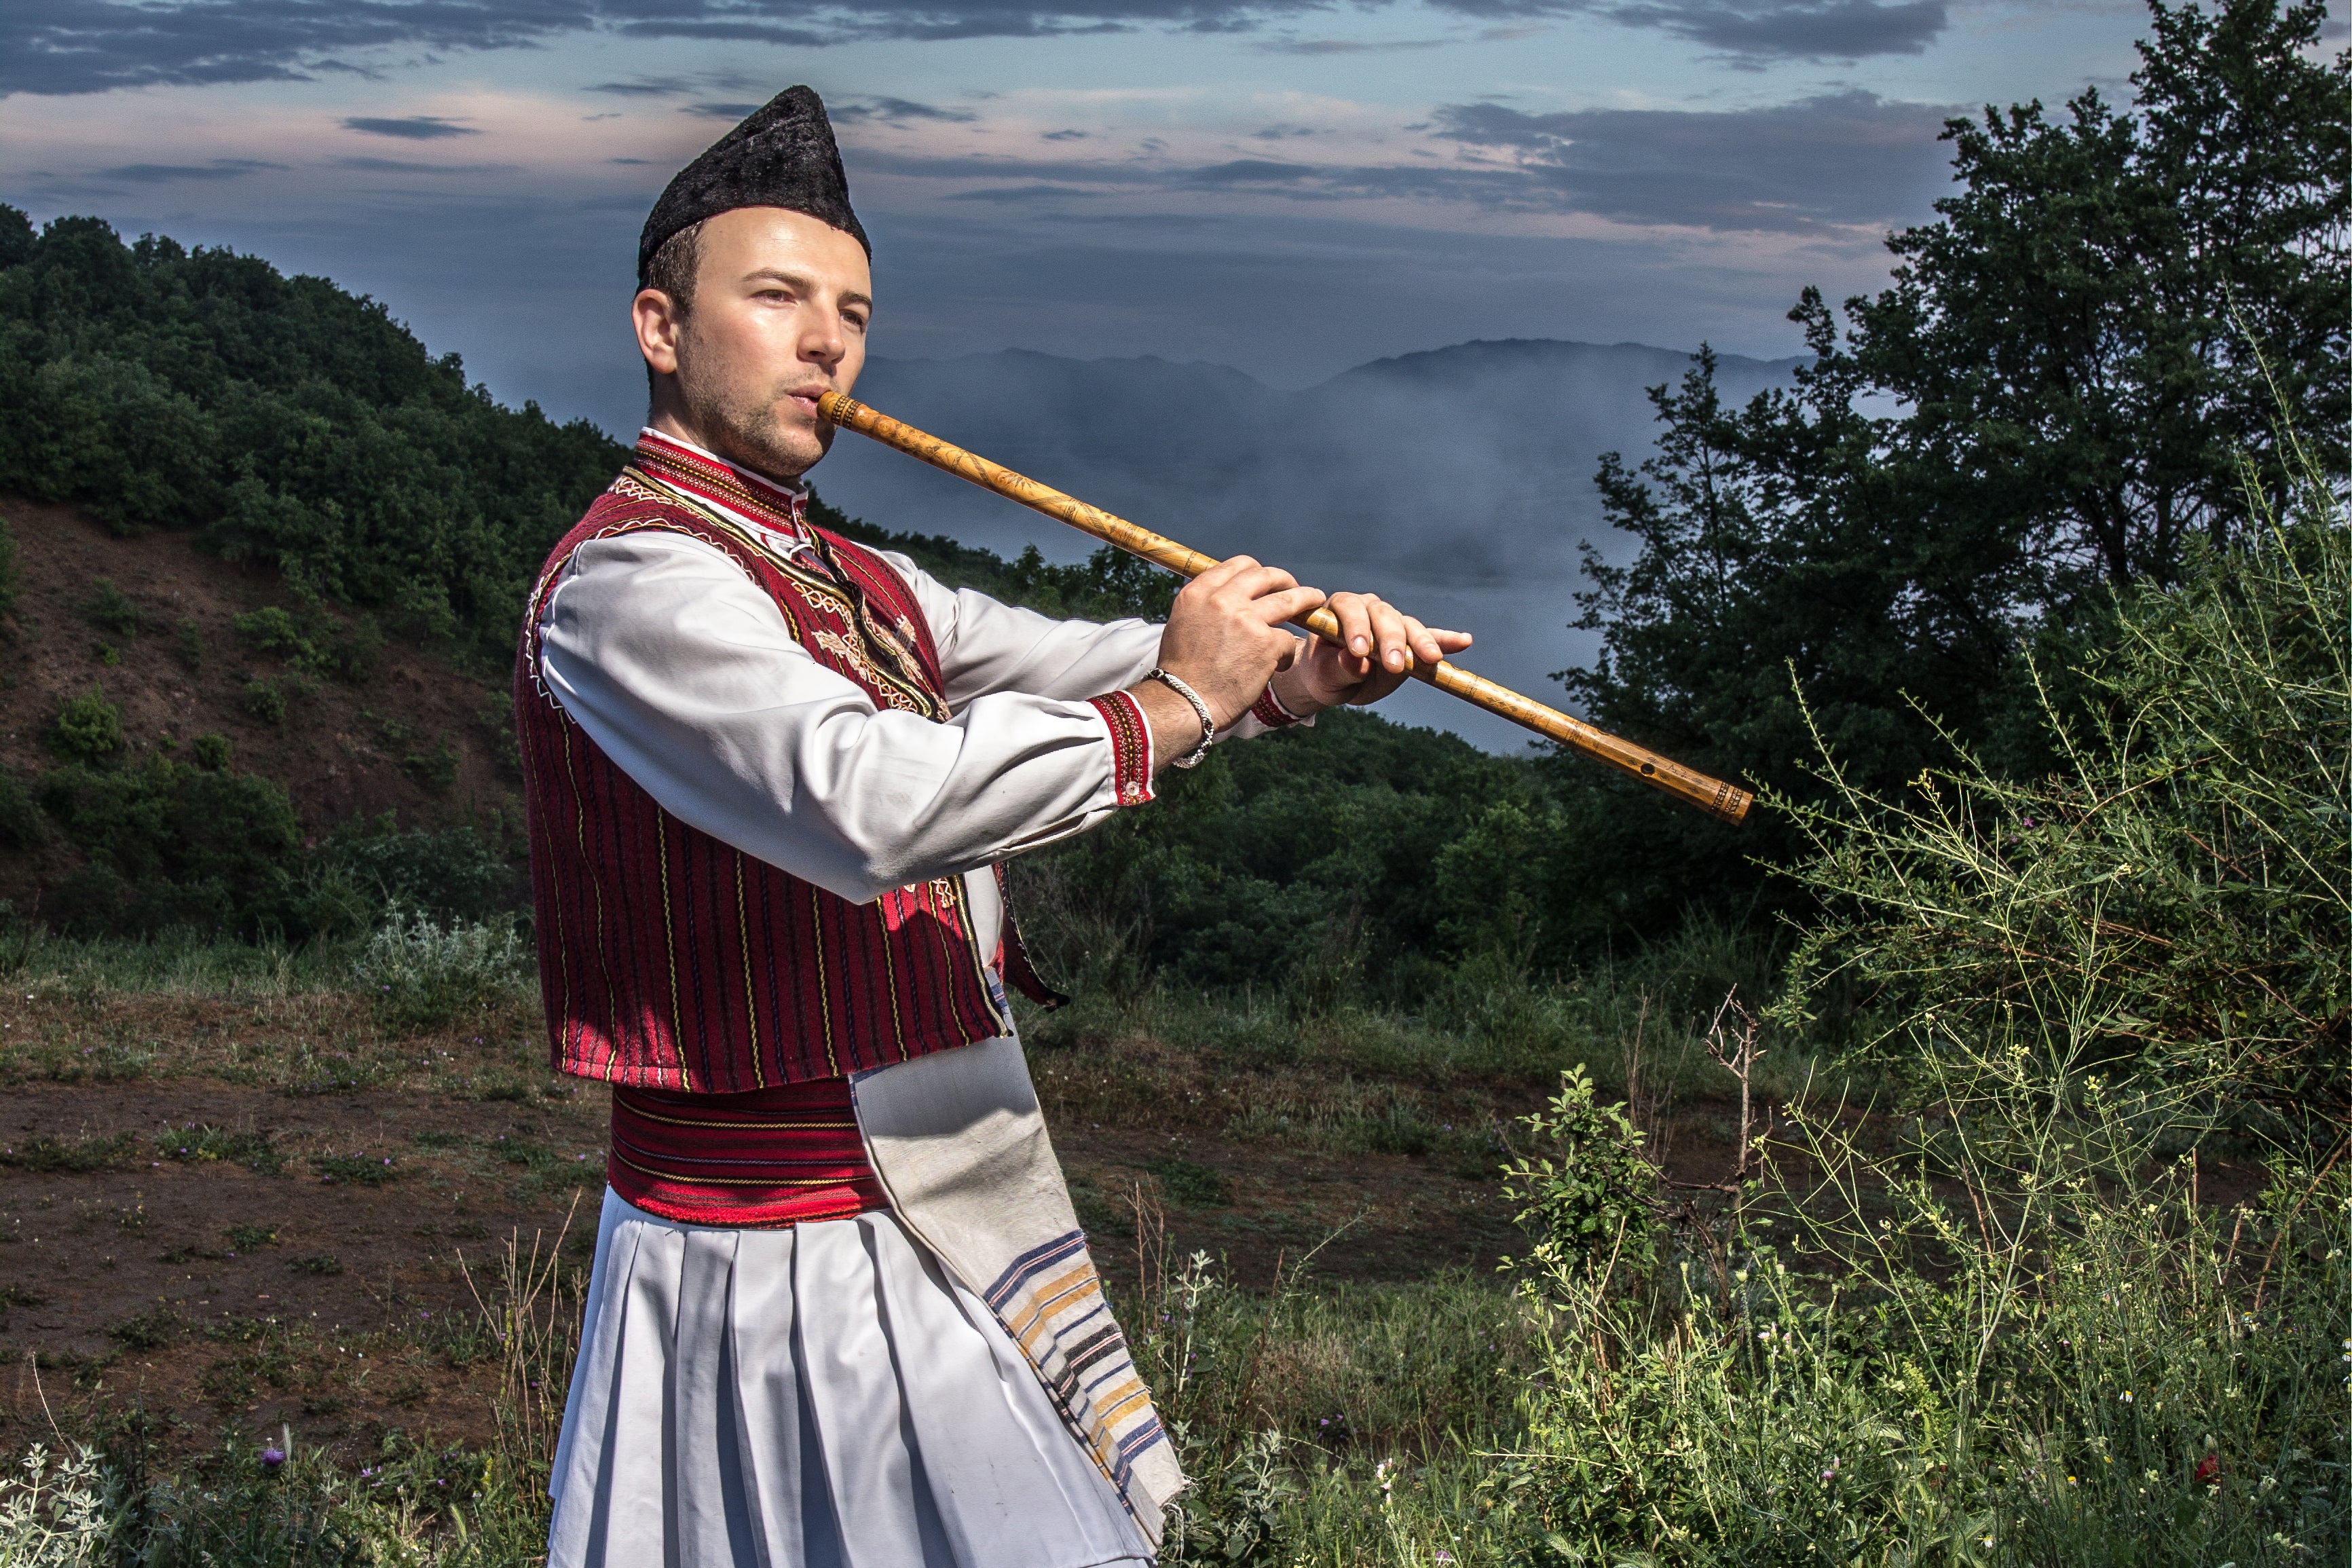 Study coauthor Aleksandar Arabadjiev of Macedonia singing and playing a traditional instrument while standing outside during dusk